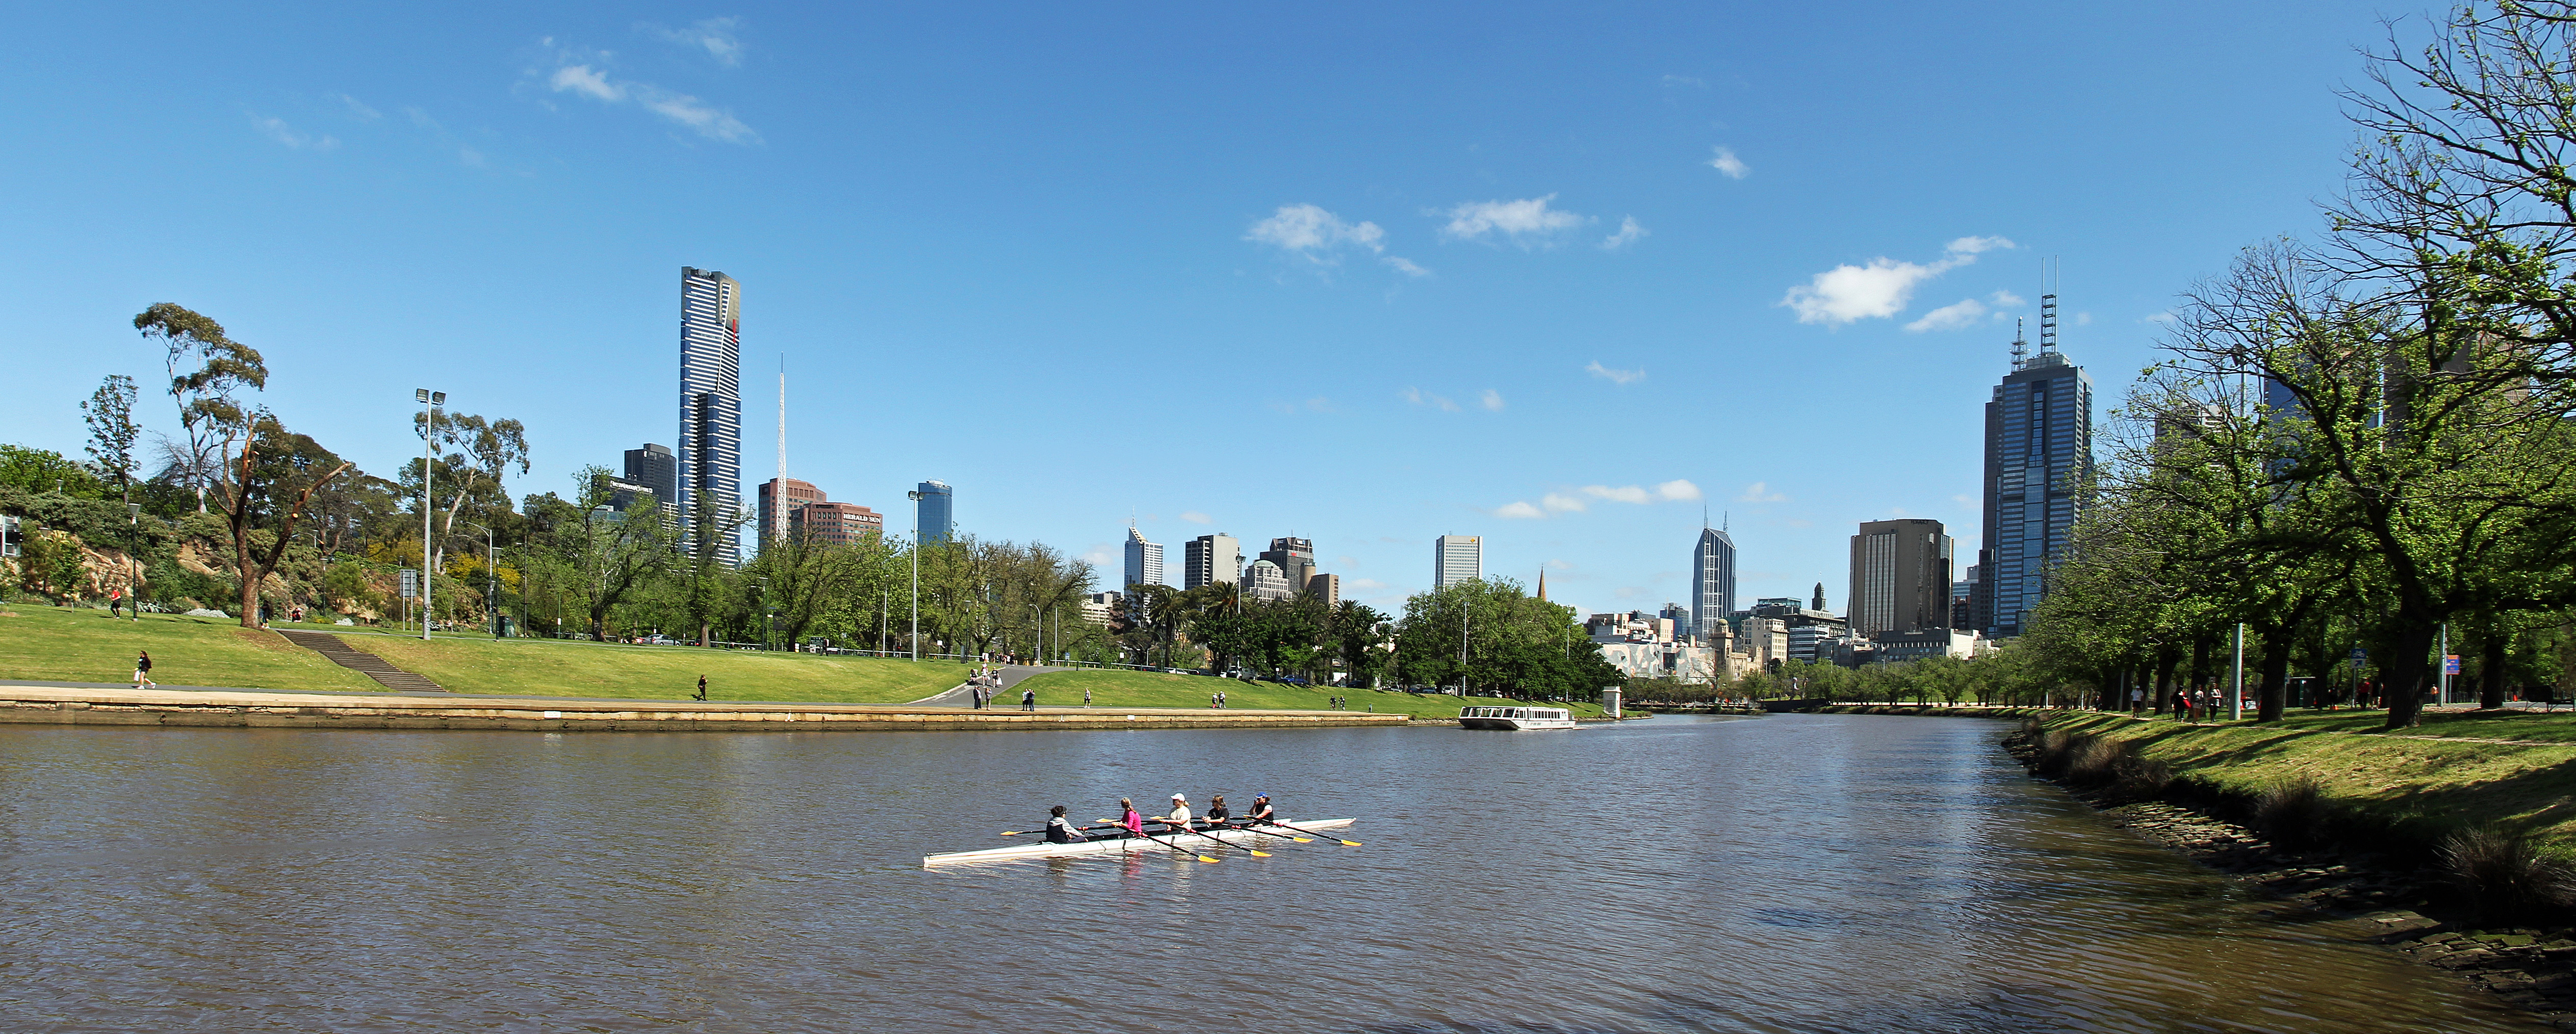 1hr Sightseeing Cruise along the Yarra River